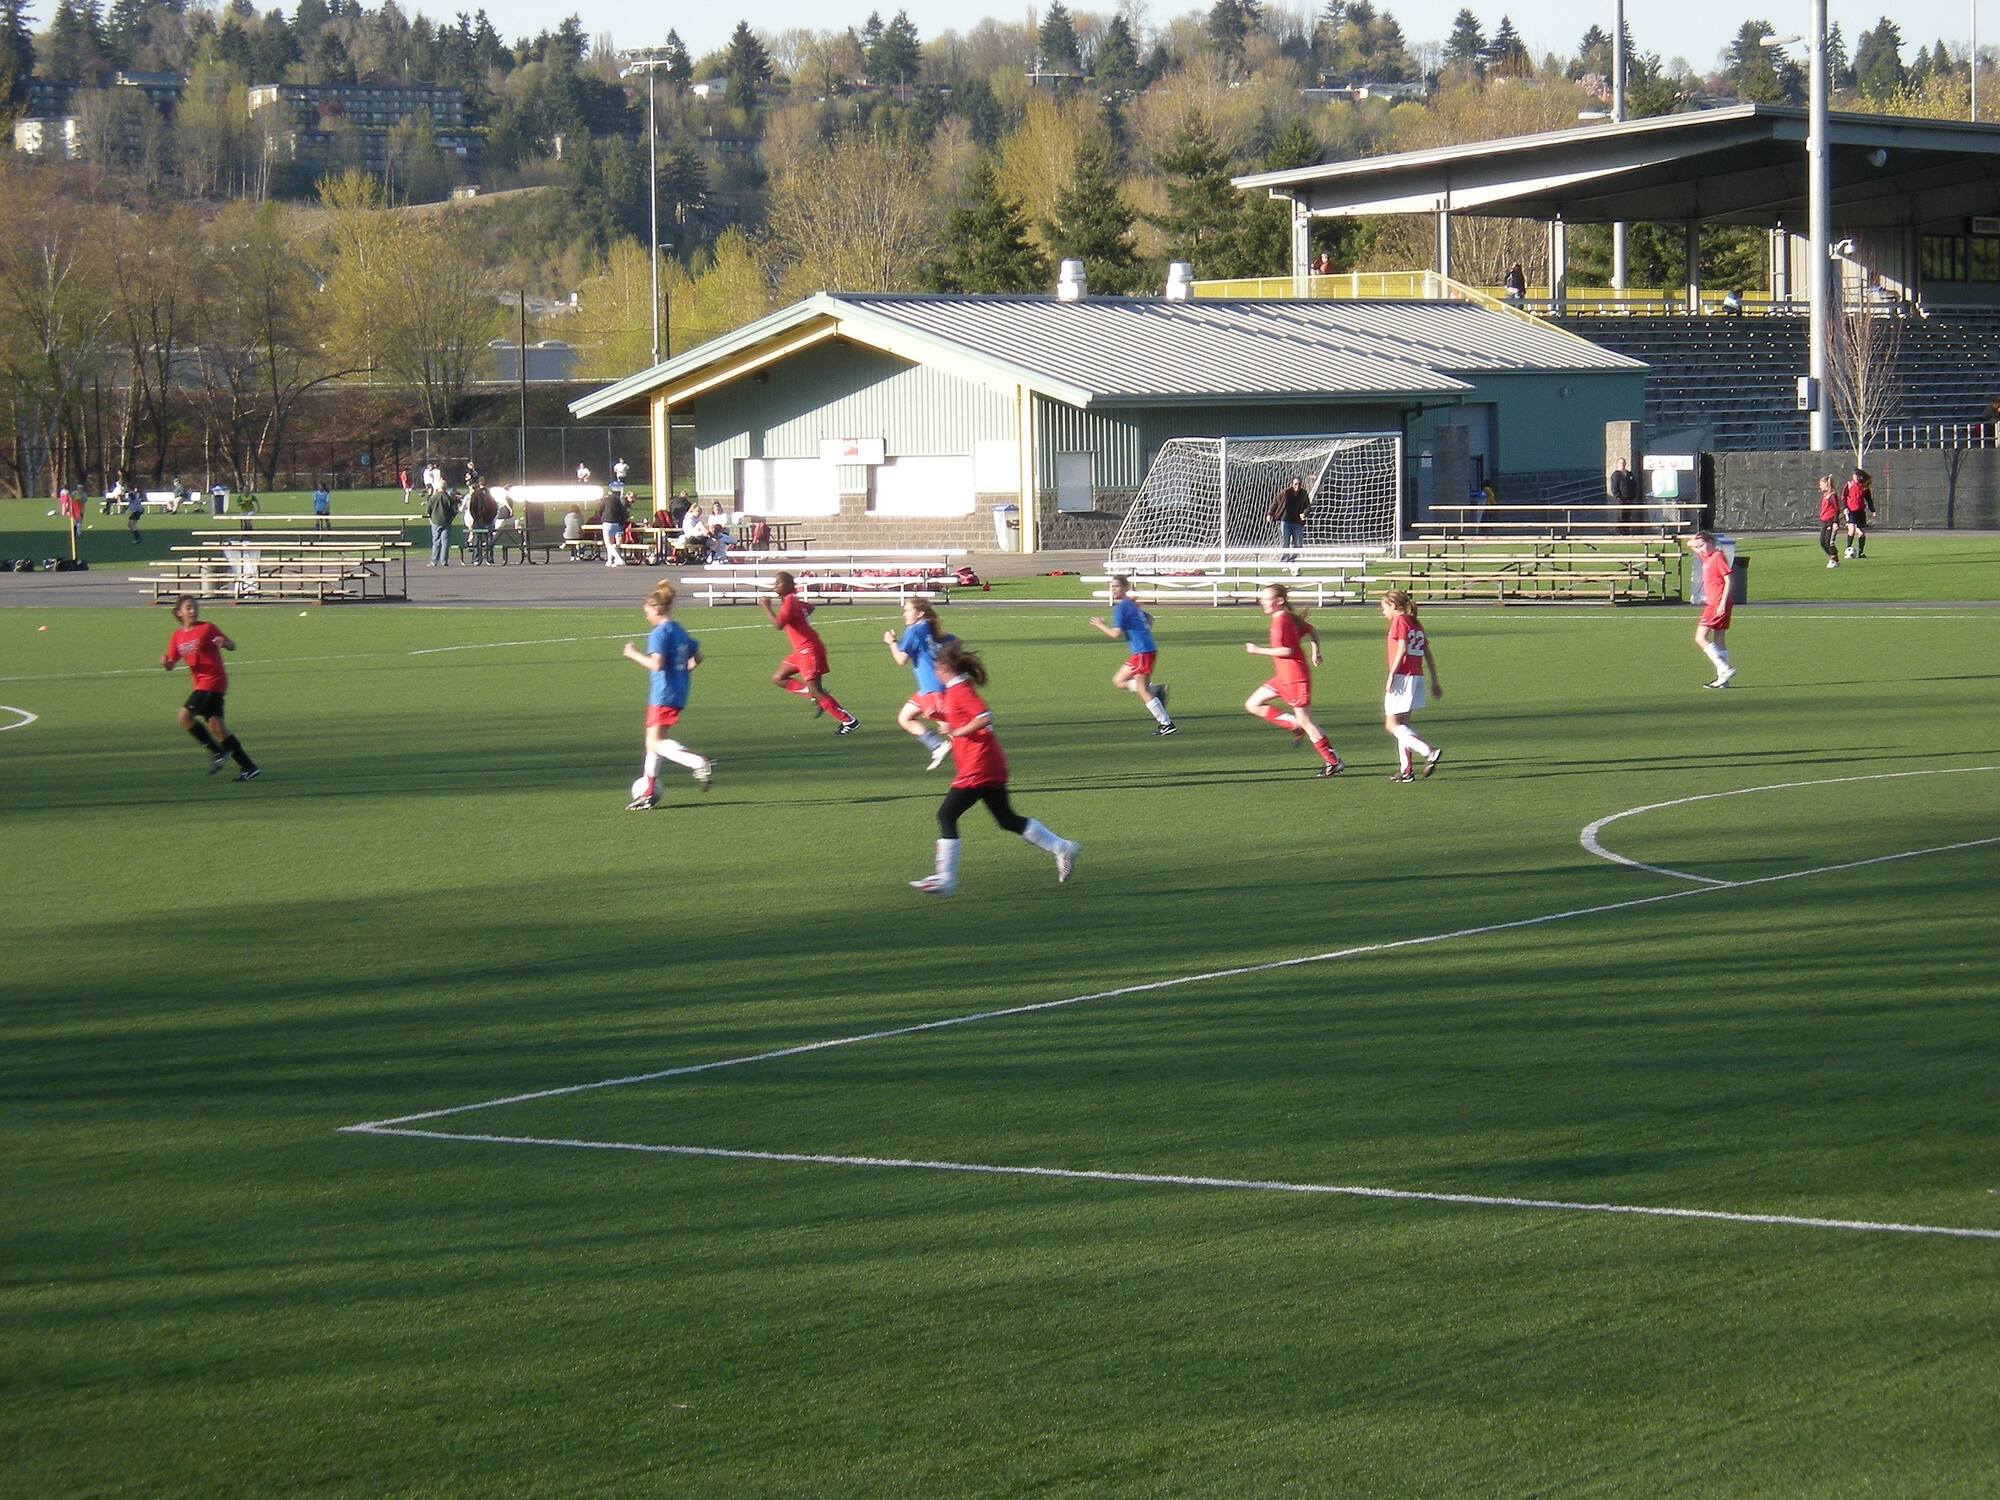 Photograph of girls playing soccer on an artificial turf field.